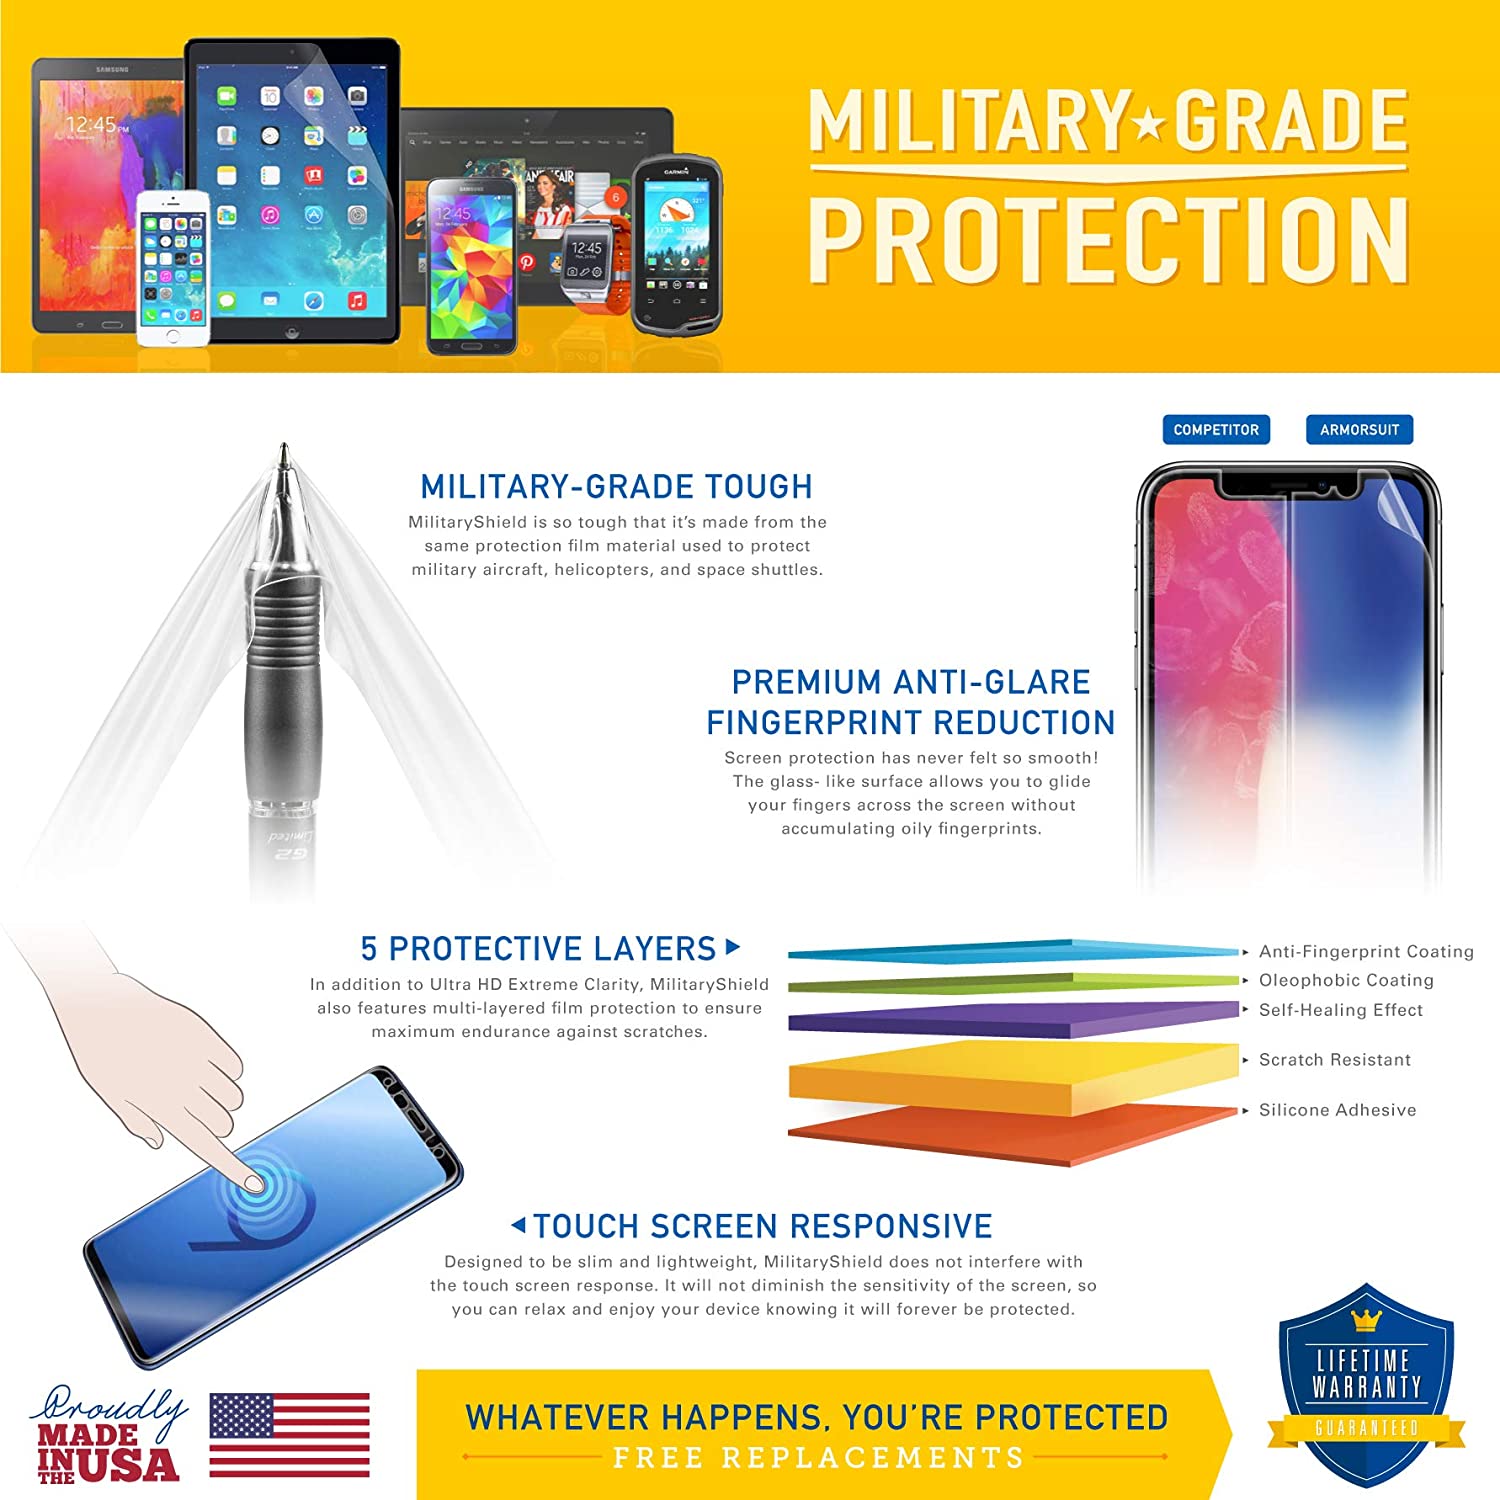 [2-Pack] Samsung Galaxy S6 Active Screen Protector